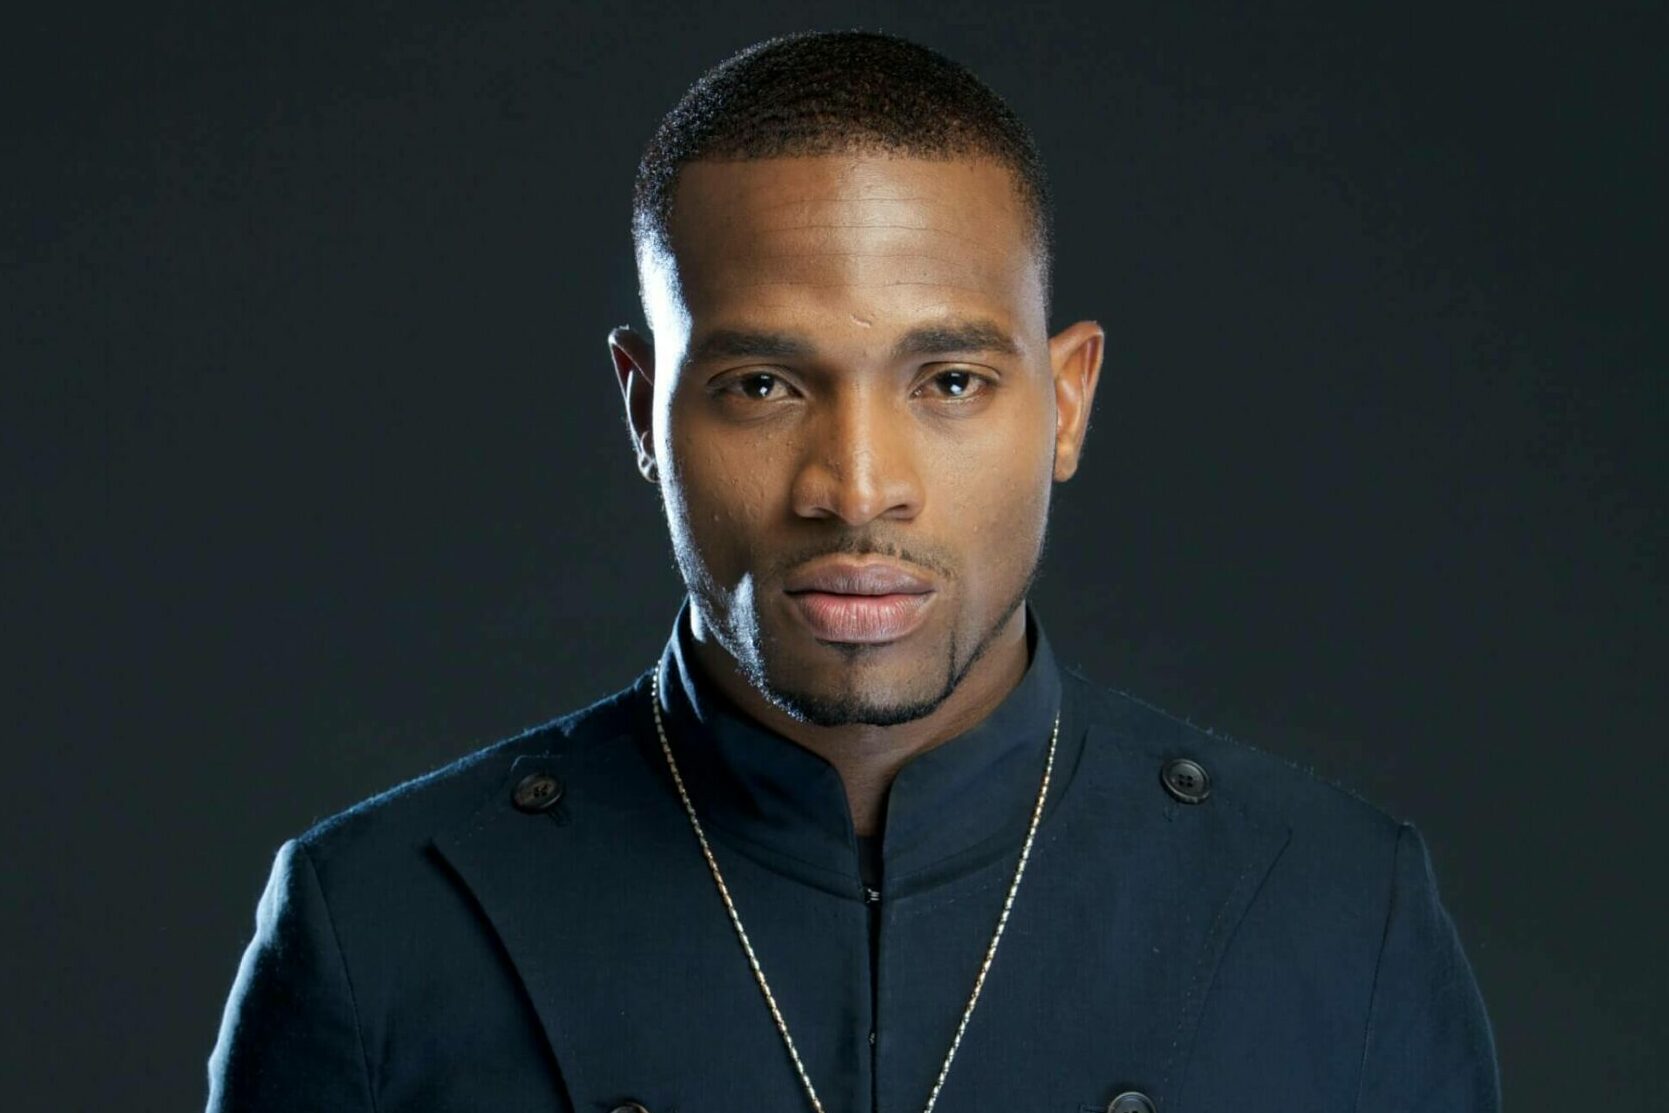 D’banj Biography: early life, education, music career, family, awards and facts